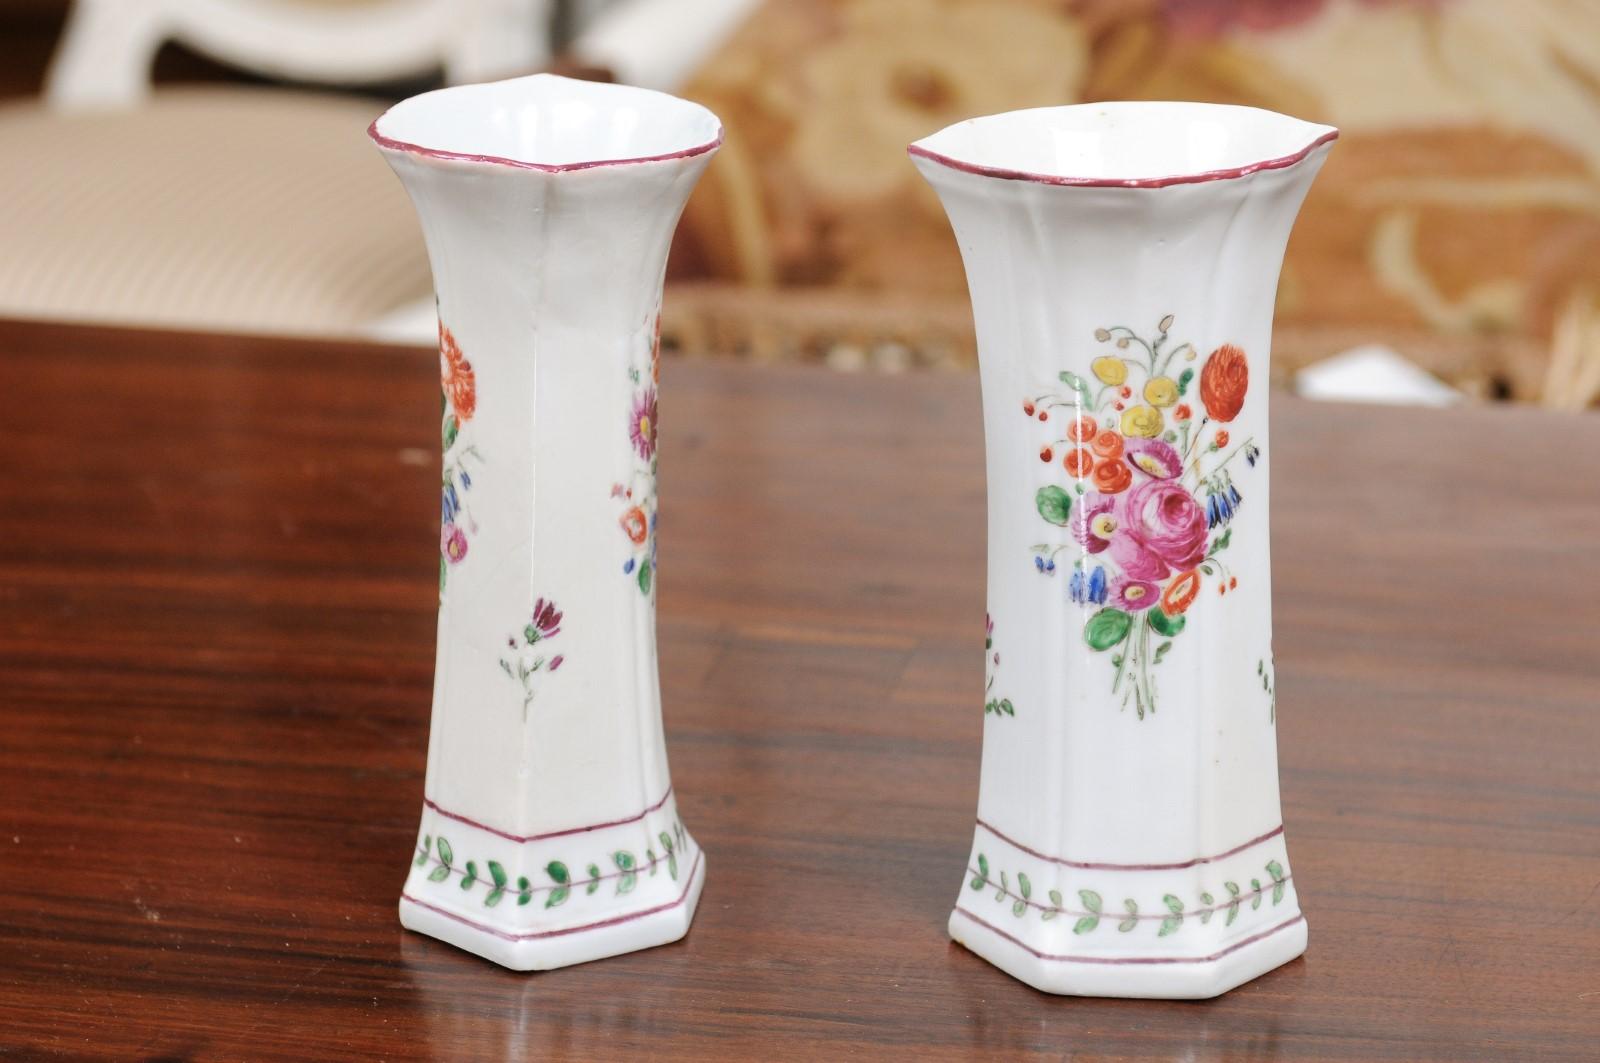 Pair of Italian Porcelain Vases with Colorful Painted Floral Motifs, circa 1805 For Sale 4